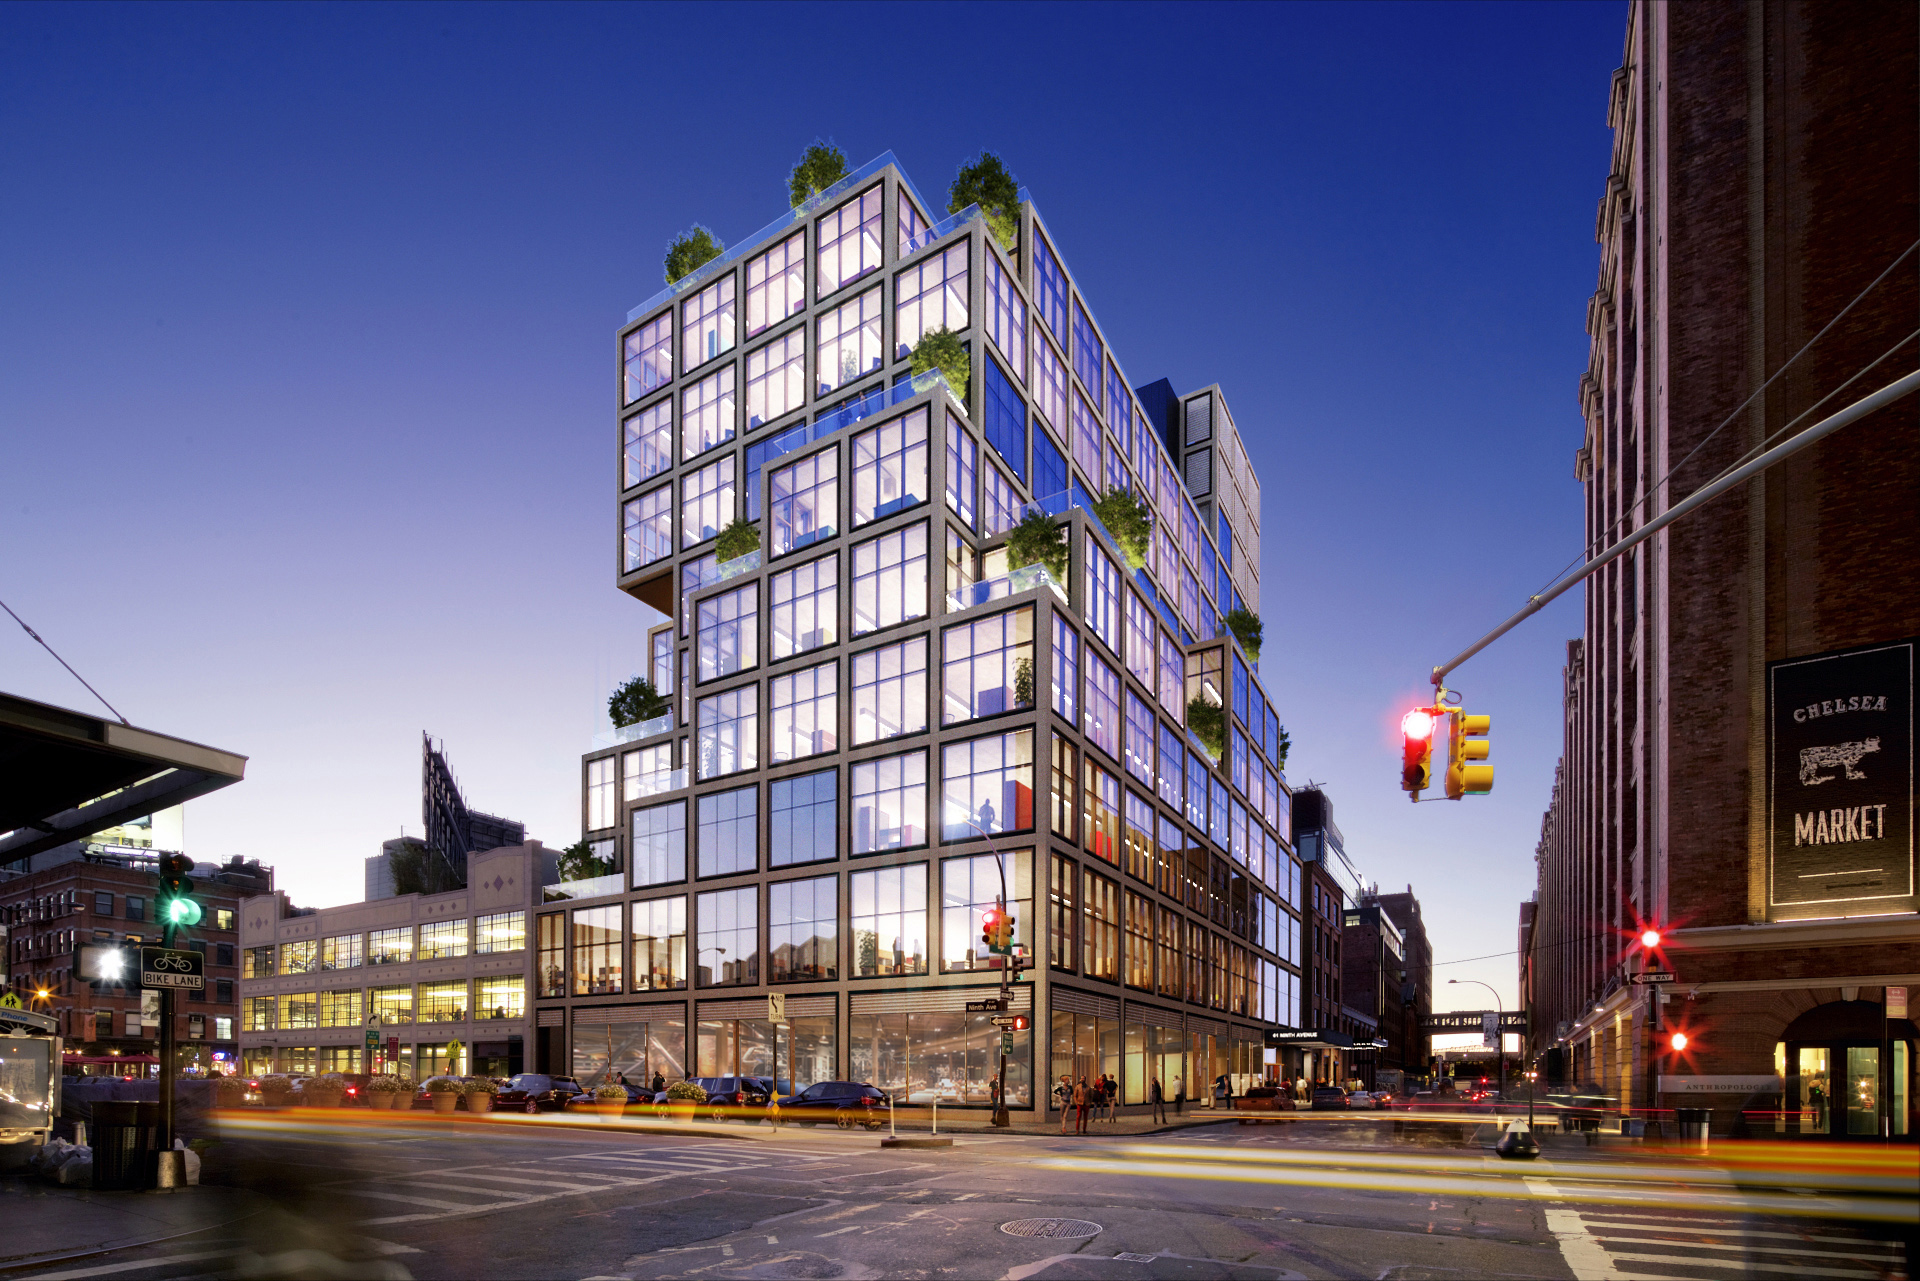 PHOTO: Rendering of Rafael Viñoly's Chelsea Building that will house the world's largest Starbucks.